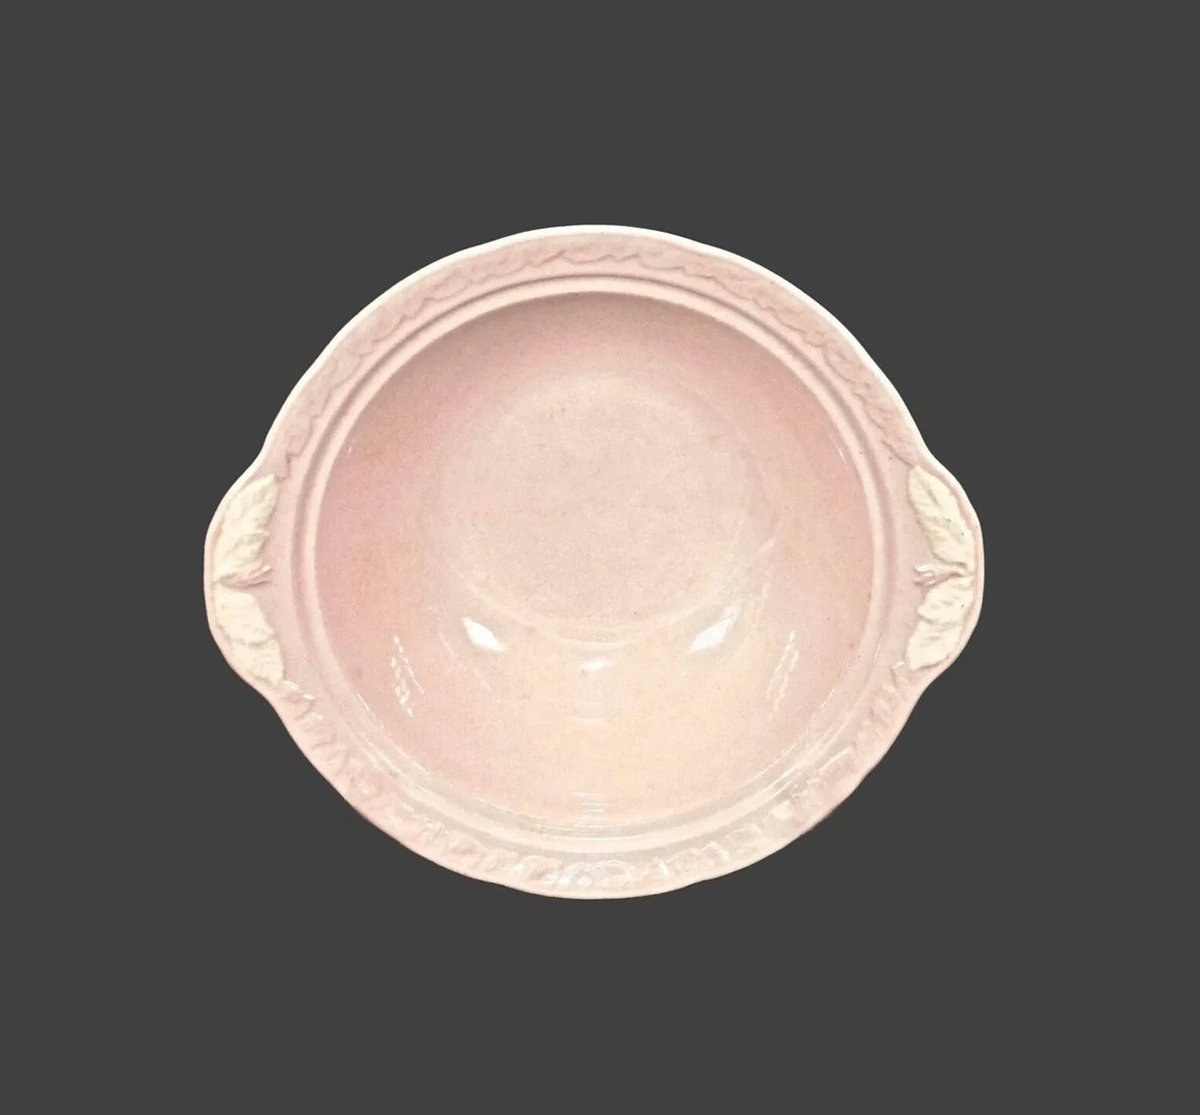 Sovereign Potters Rosewood Pink round, rimmed, lugged serving bowl. etsy.me/44I13e4 via @Etsy #BuyfromGroovy #antiqueshop #tabledecor #tableware #dinnerware #pinkdishes #SovereignPotters #RosewoodPink #SovereignRosewood #SovereignRosewoodPink #EtsySellers